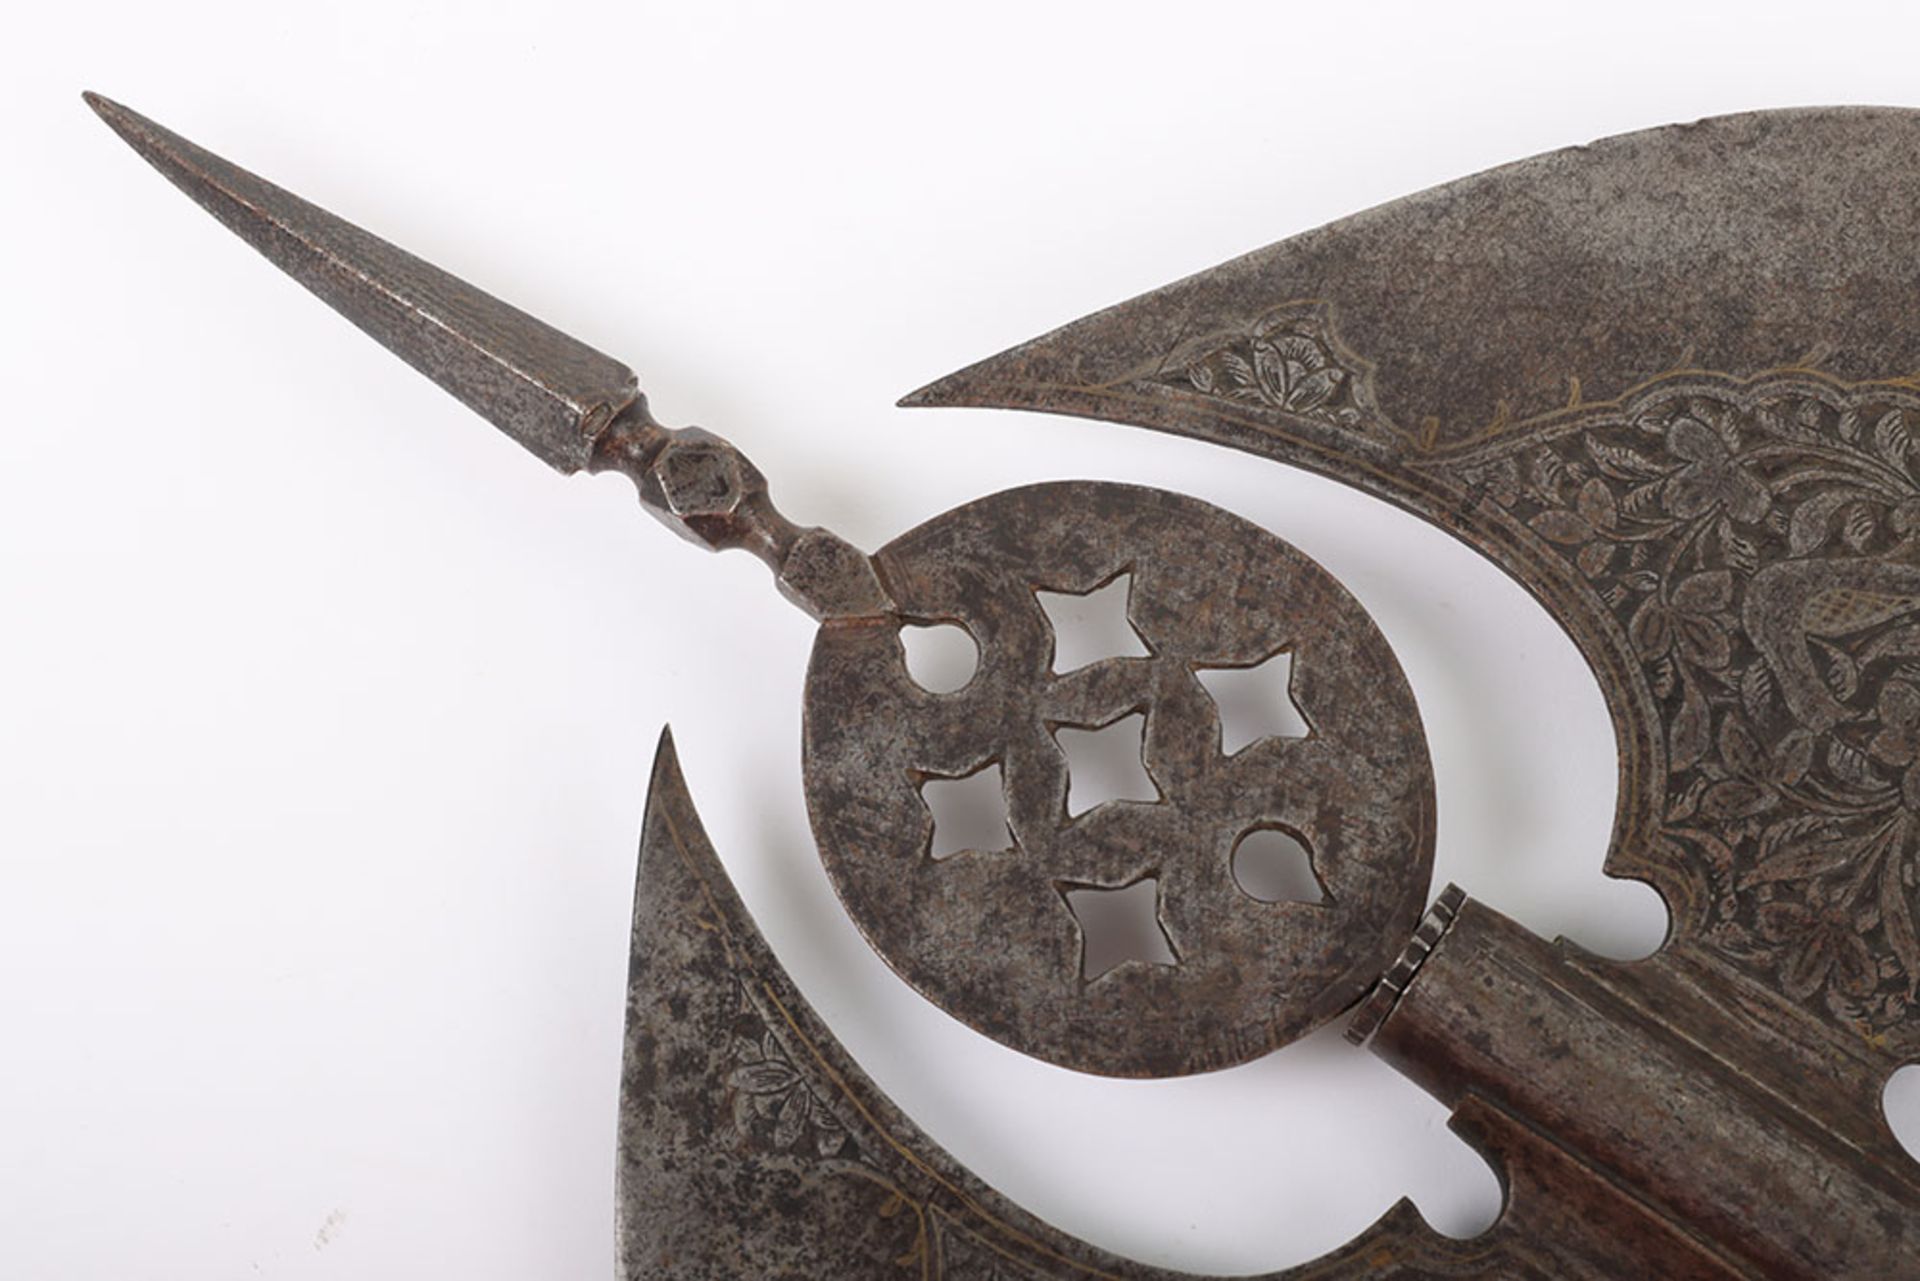 Large 19th Century Indo-Persian All Steel Double Axe Tabar - Image 8 of 12